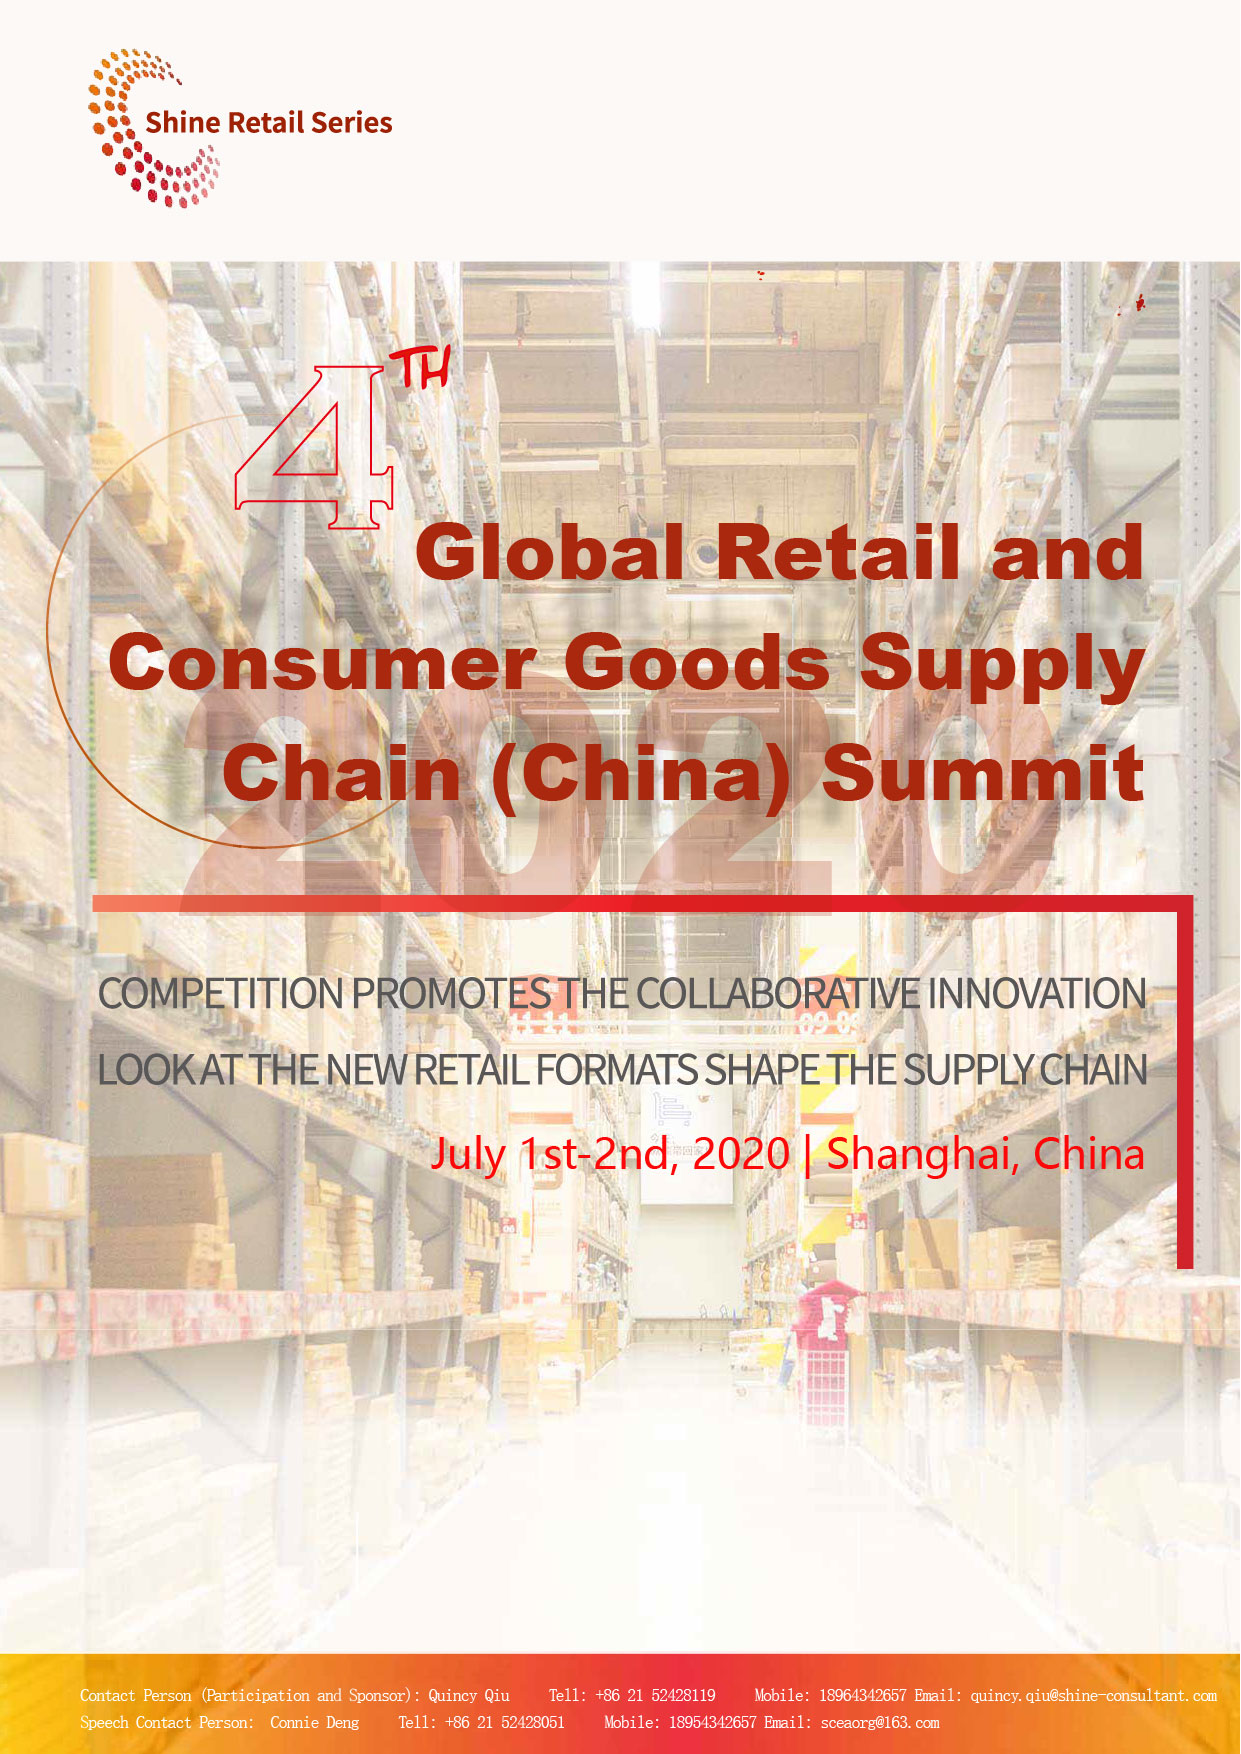 The 4th Global Retail and Consumer Goods Supply Chain (China) Summit